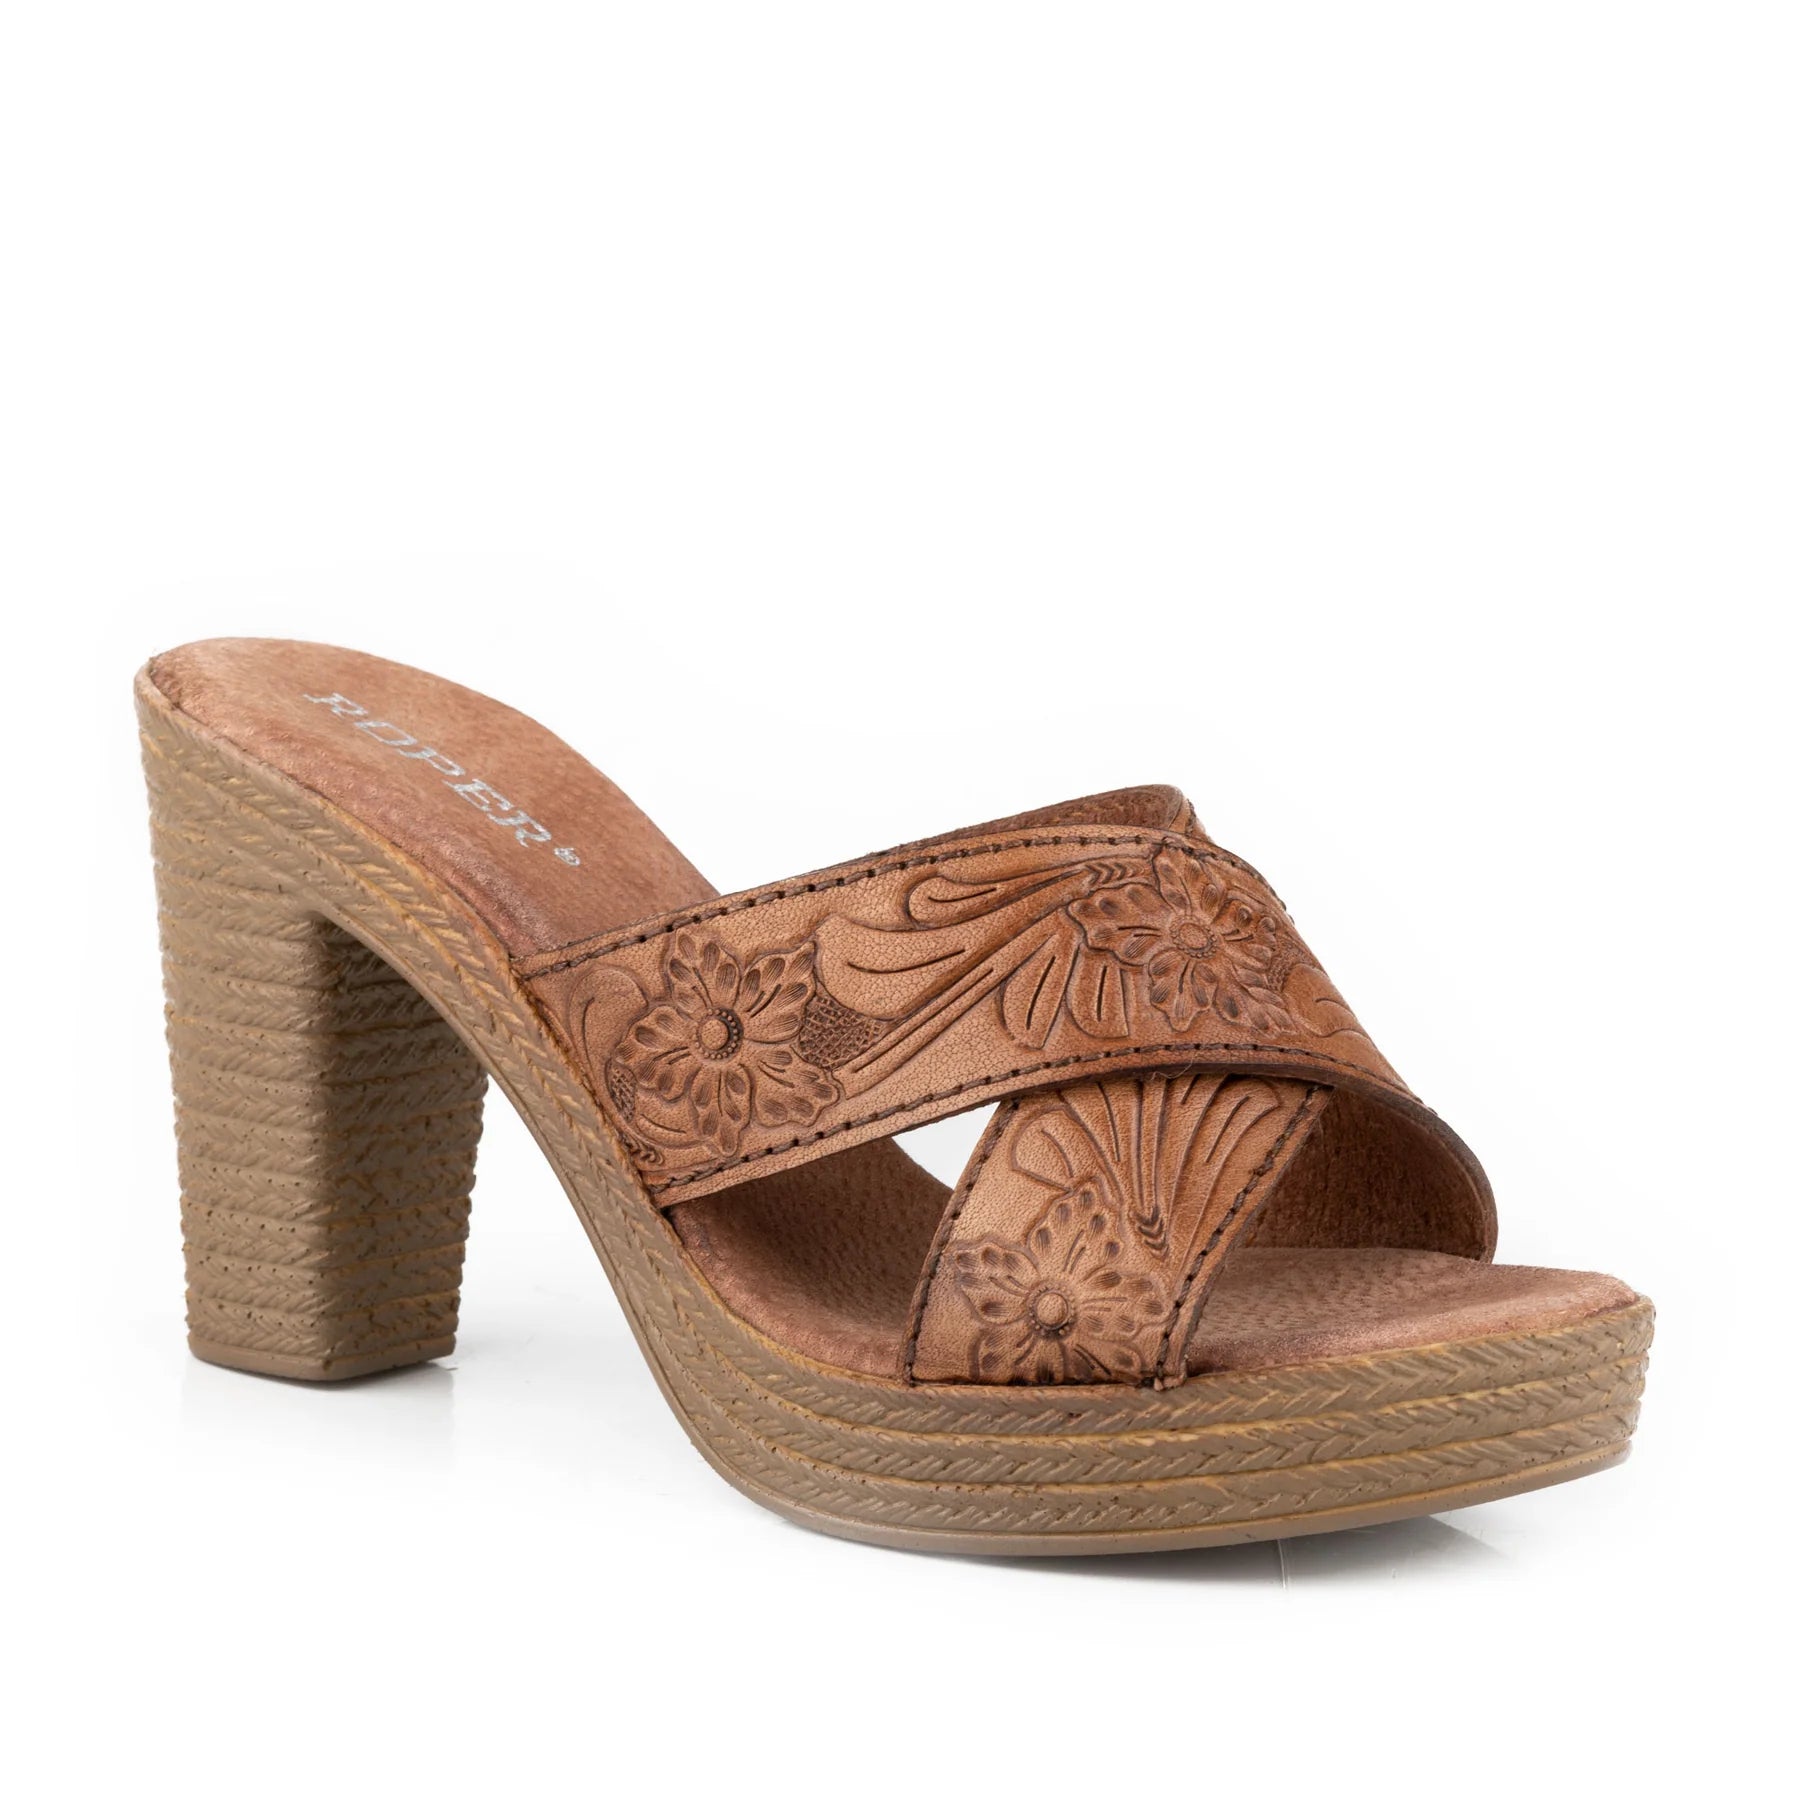 Roper Wms Mika Cross Strap Tan Tooled Leather